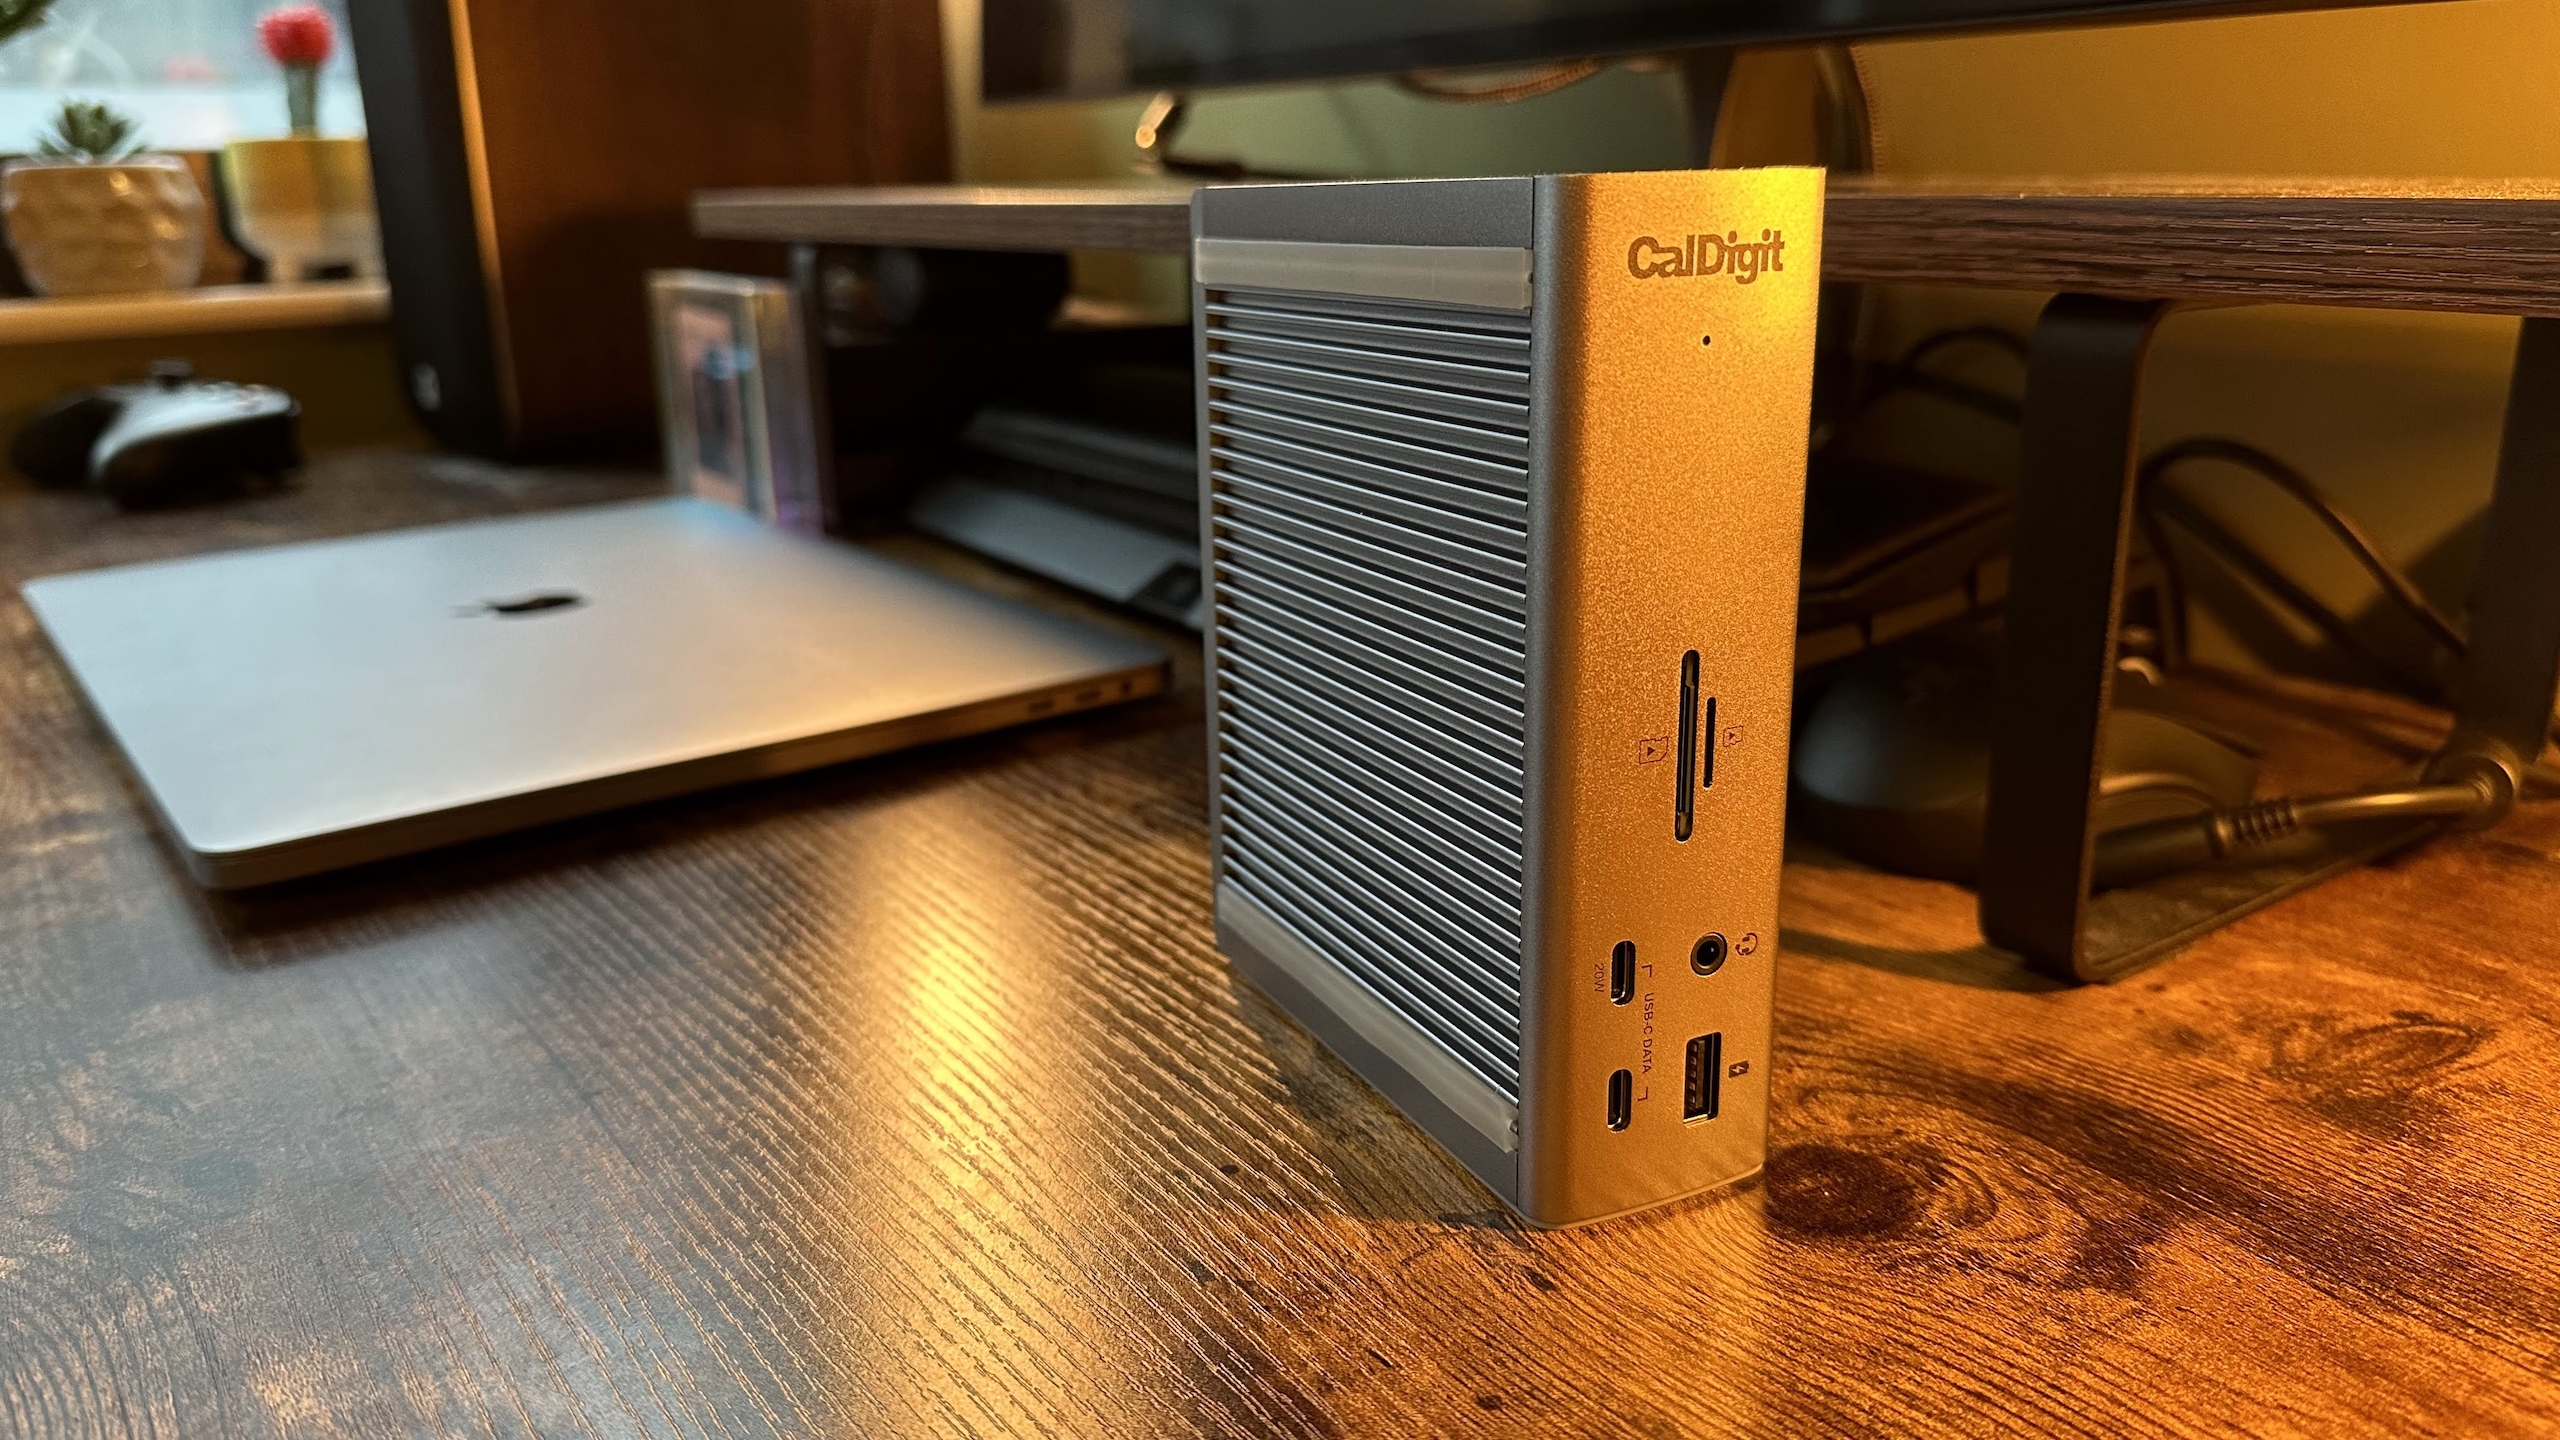 CalDigit TS4 Thunderbolt 4 dock review: All the ports you could